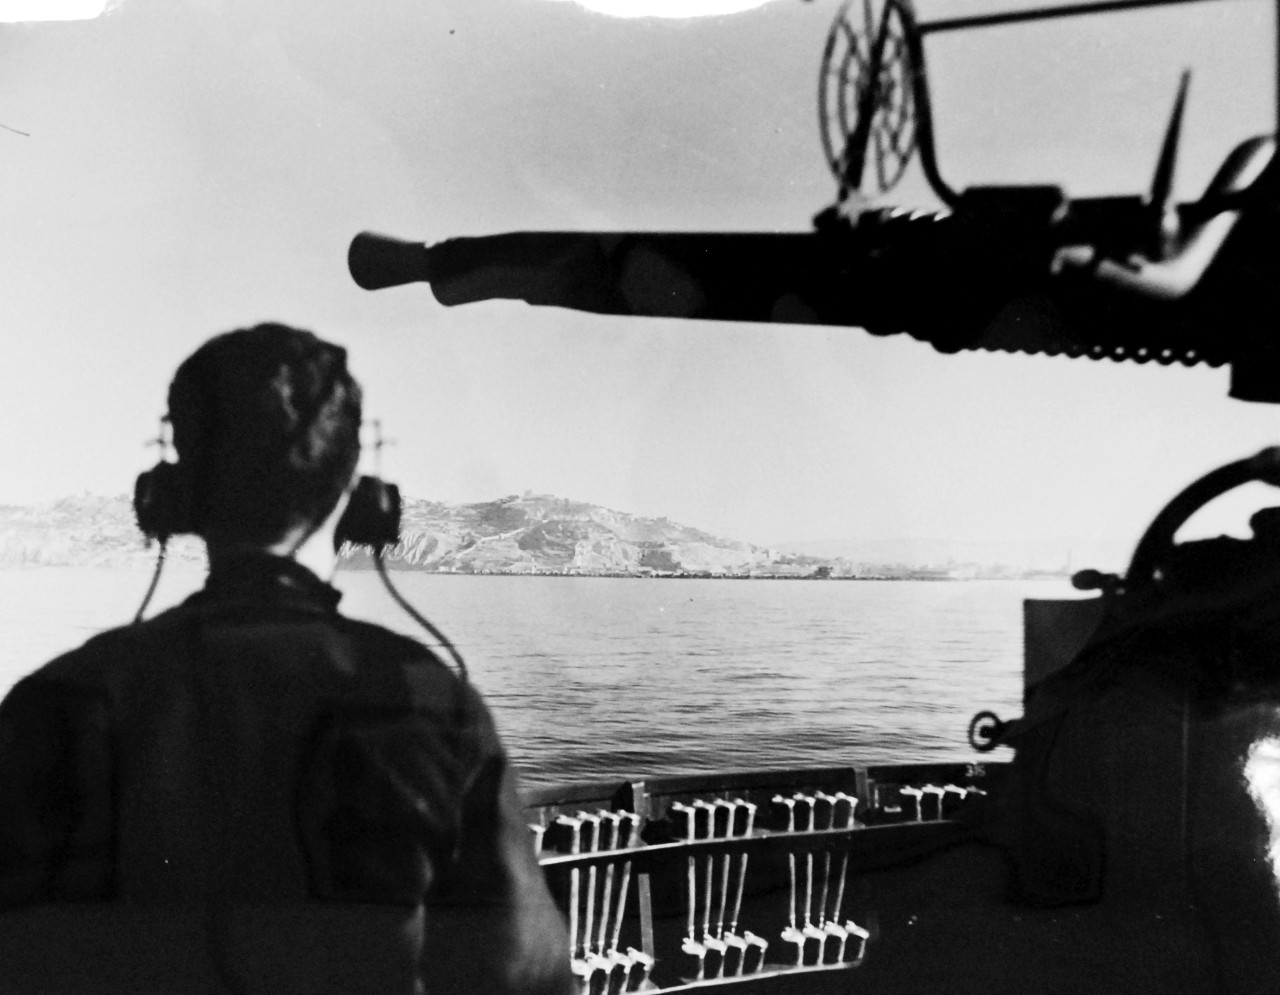 LC-Lot-805-40: Operation Husky - Invasion of Sicily, July-August 1943. Licata Comes Within Range.  Framed by the death-dealing barrels of a dual-purpose 20mm gun aboard a destroyer and the silhouette of an observer, the city of Licata, Sicily, Italy, comes within easy range of an American destroyer.  It was “Invasion Day” and the destroyer was but one of the great armada of ships.   Photograph released July 29, 1943.  Photographed through Mylar sleeve. U.S. Navy Photograph.  Courtesy of the Library of Congress.  (2015/10/30).